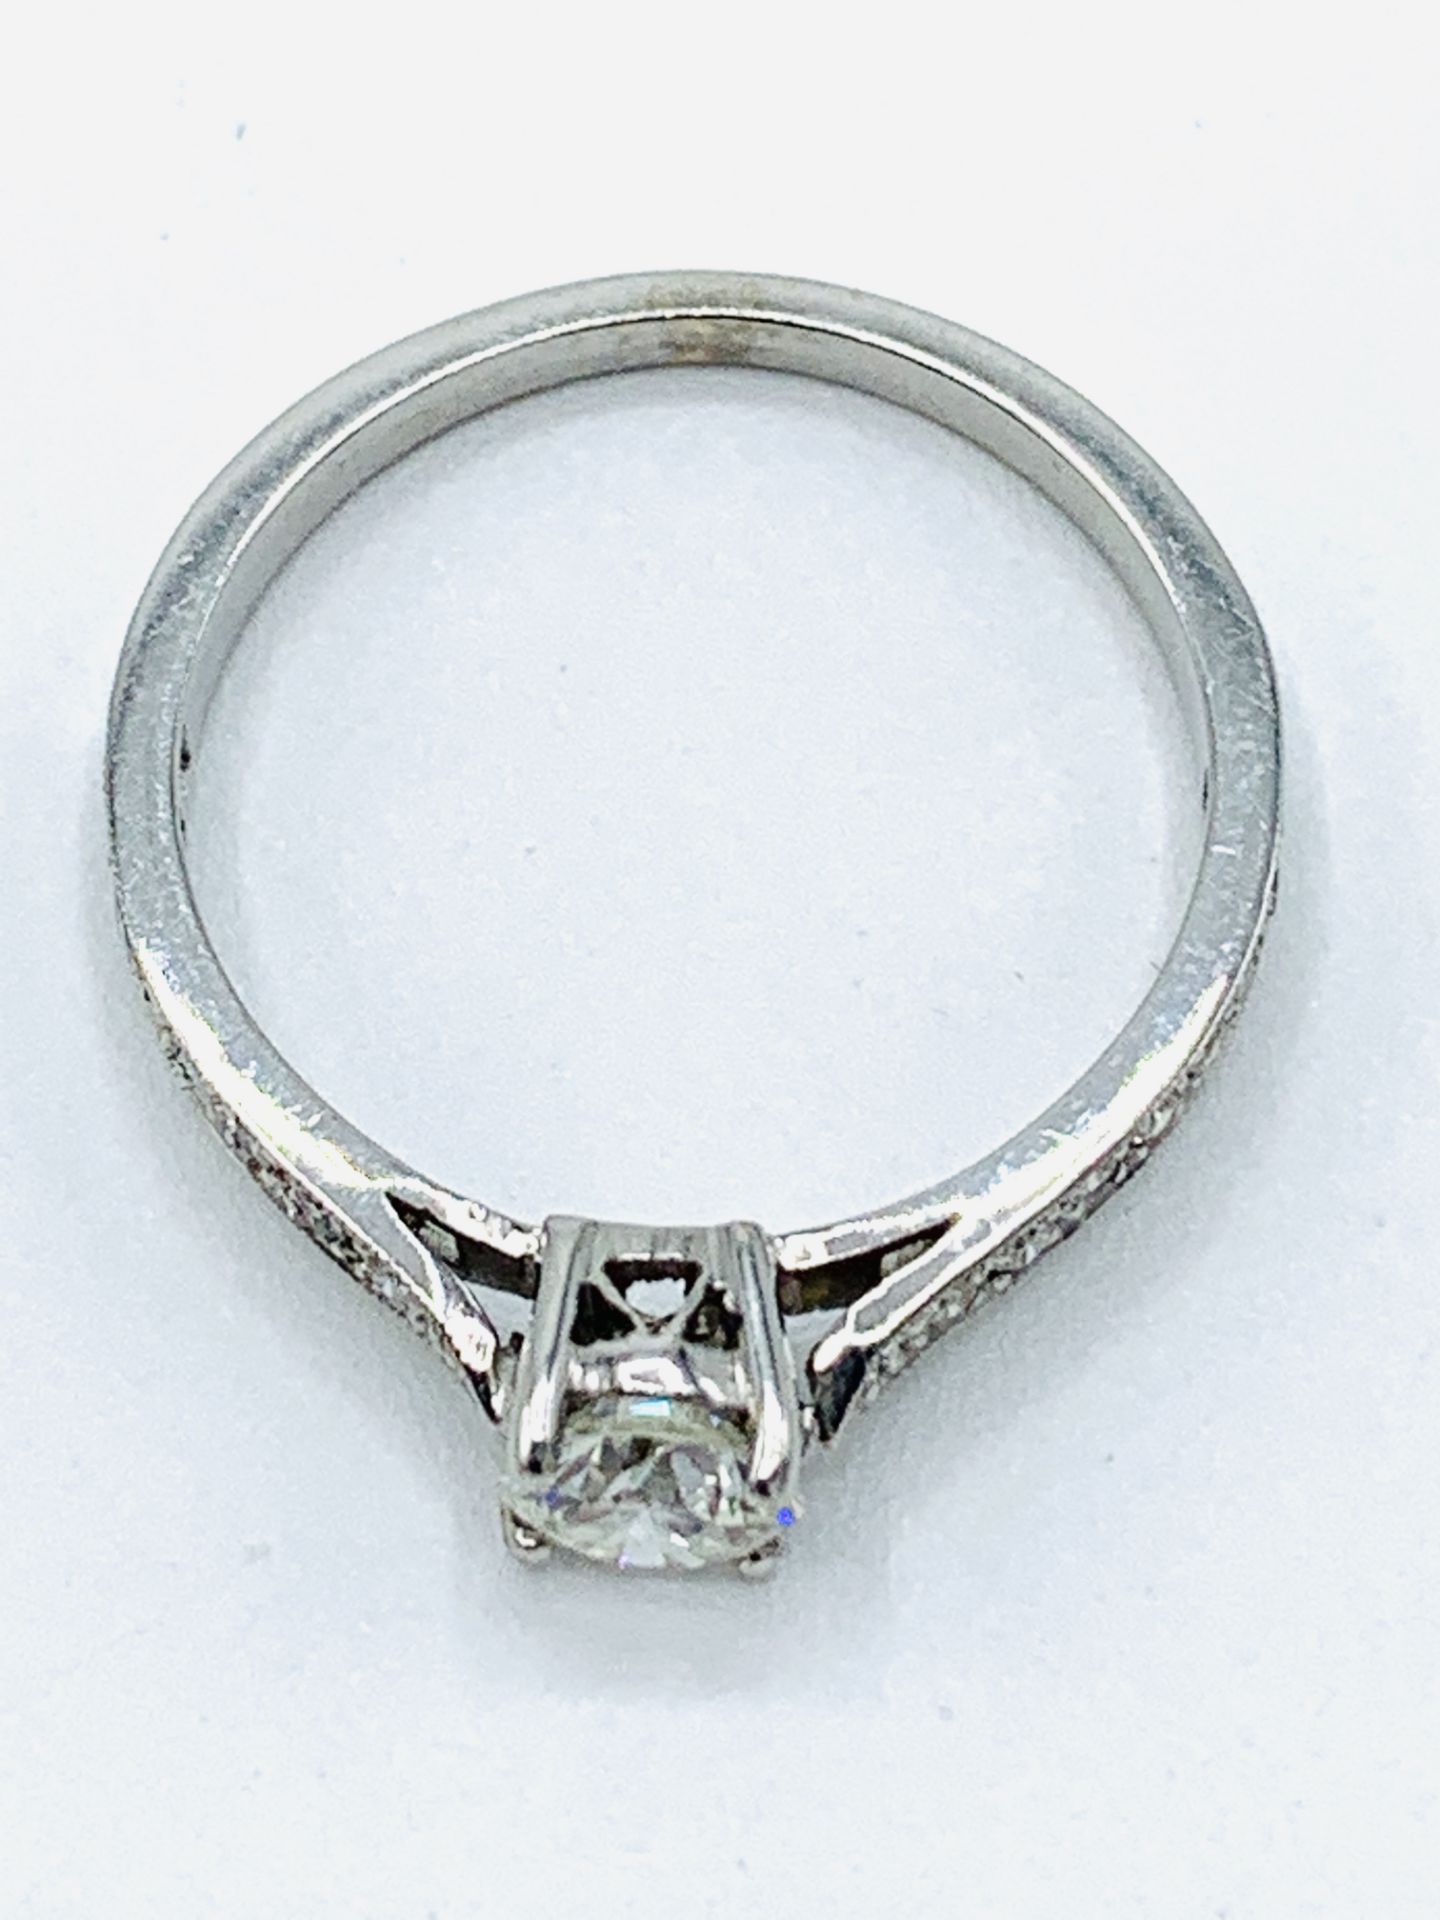 White gold solitaire ring with diamond shoulders - Image 4 of 4